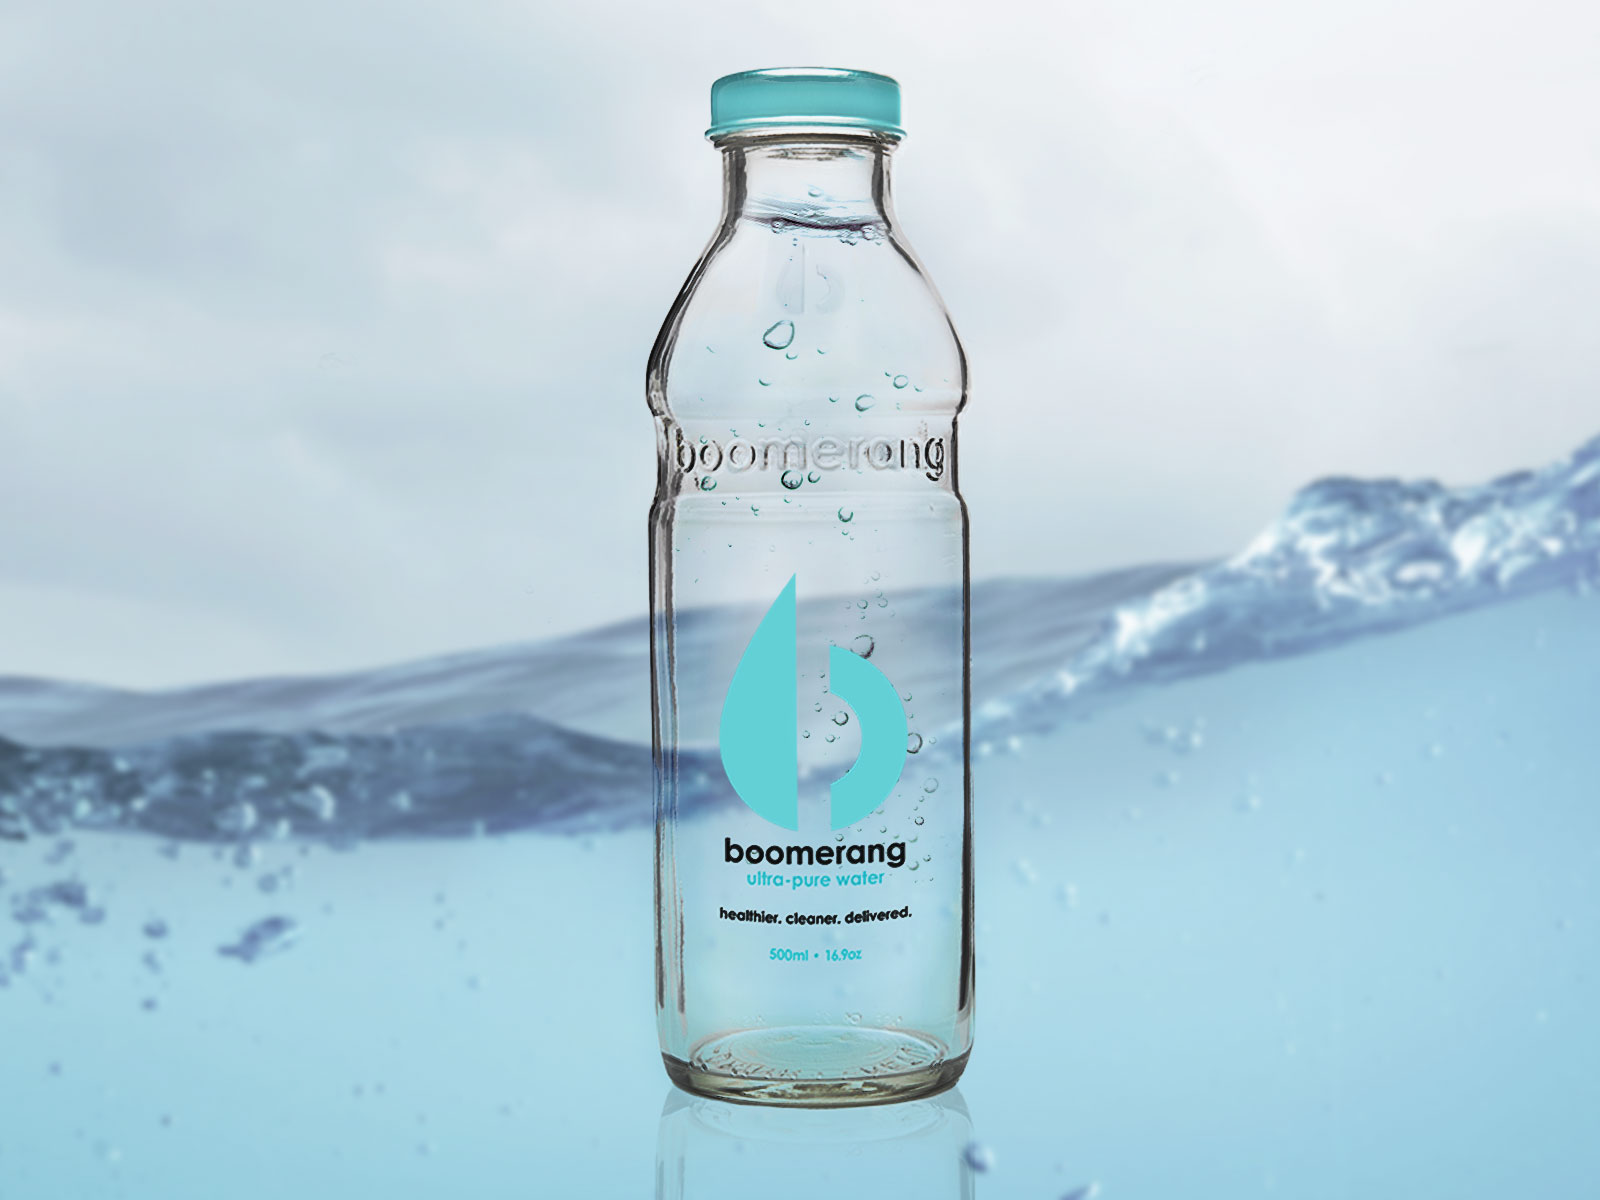 Boomerang's Durable, Refillable Glass Water Bottle Breaks Convention | OI